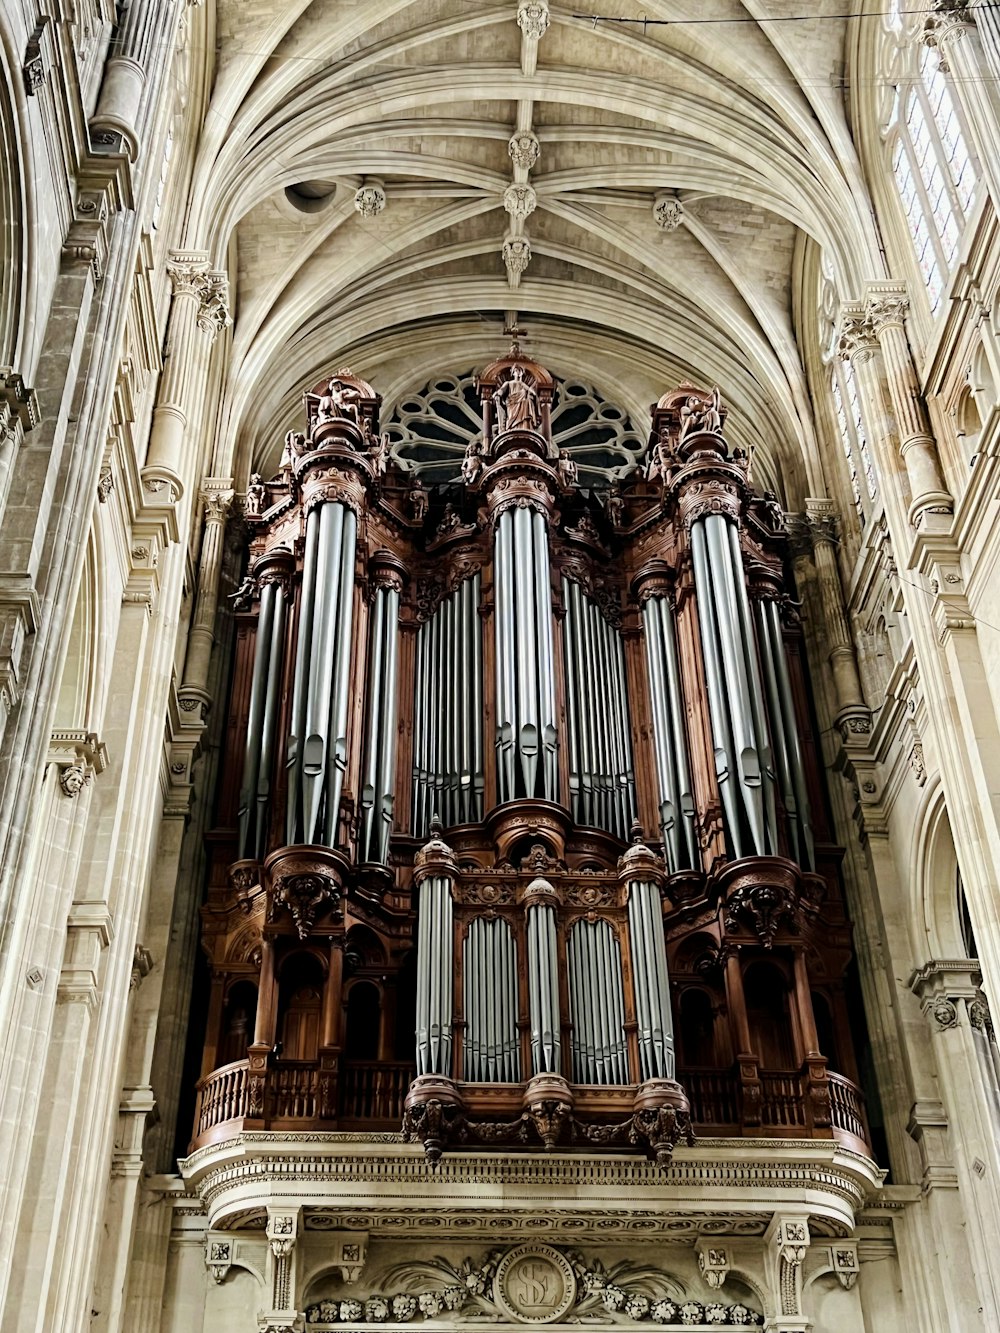 a large pipe organ in a large cathedral